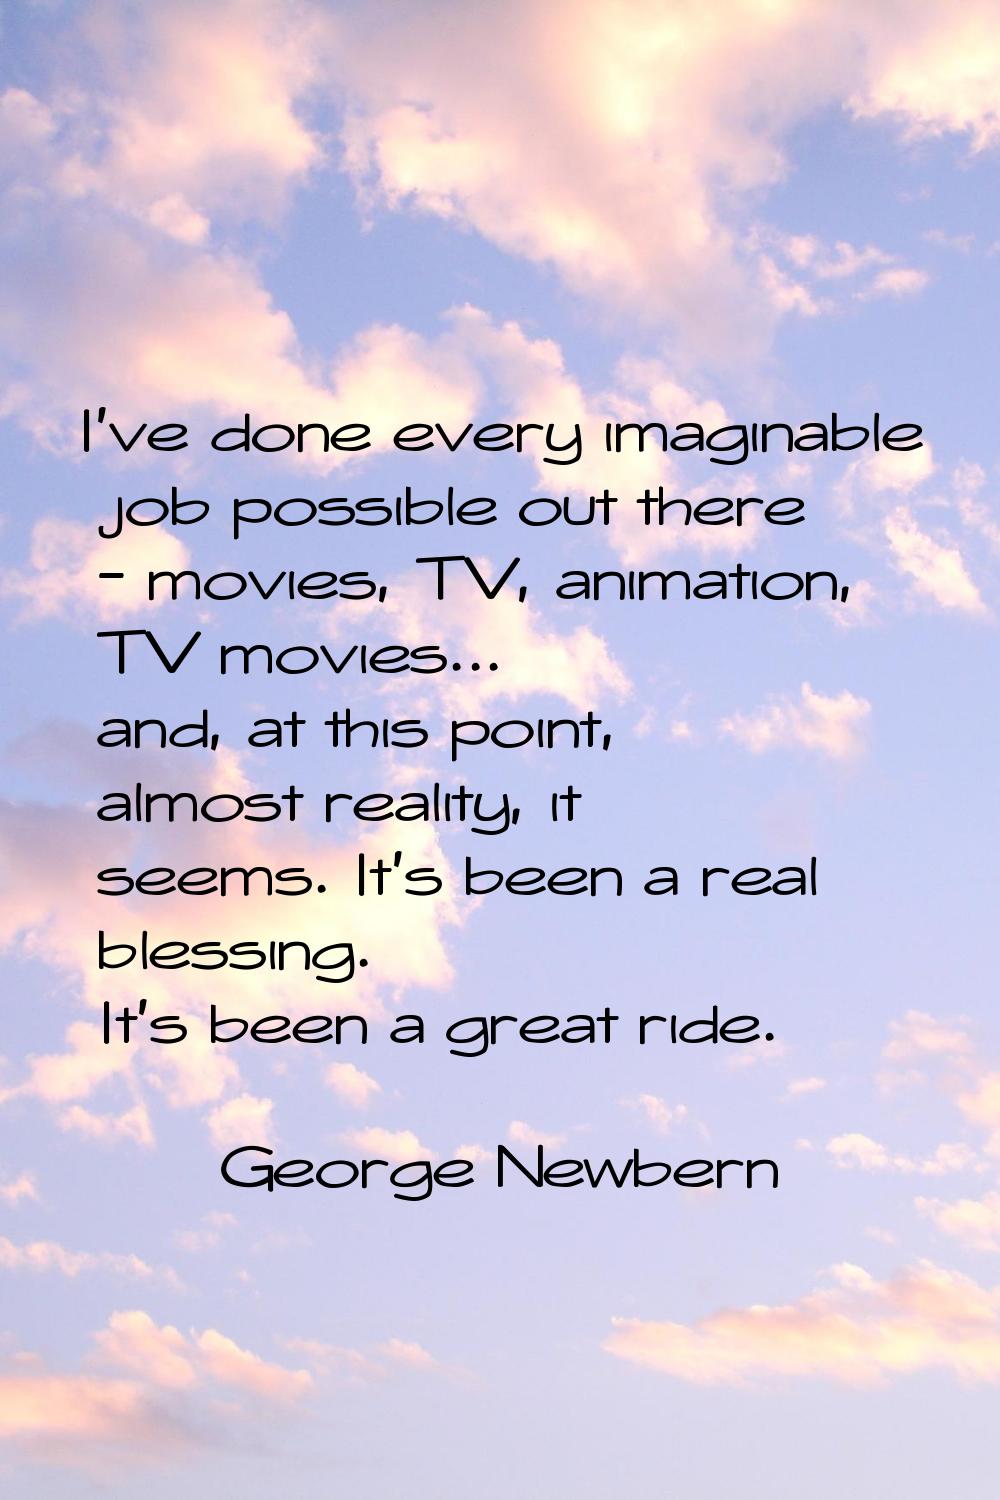 I've done every imaginable job possible out there - movies, TV, animation, TV movies... and, at thi